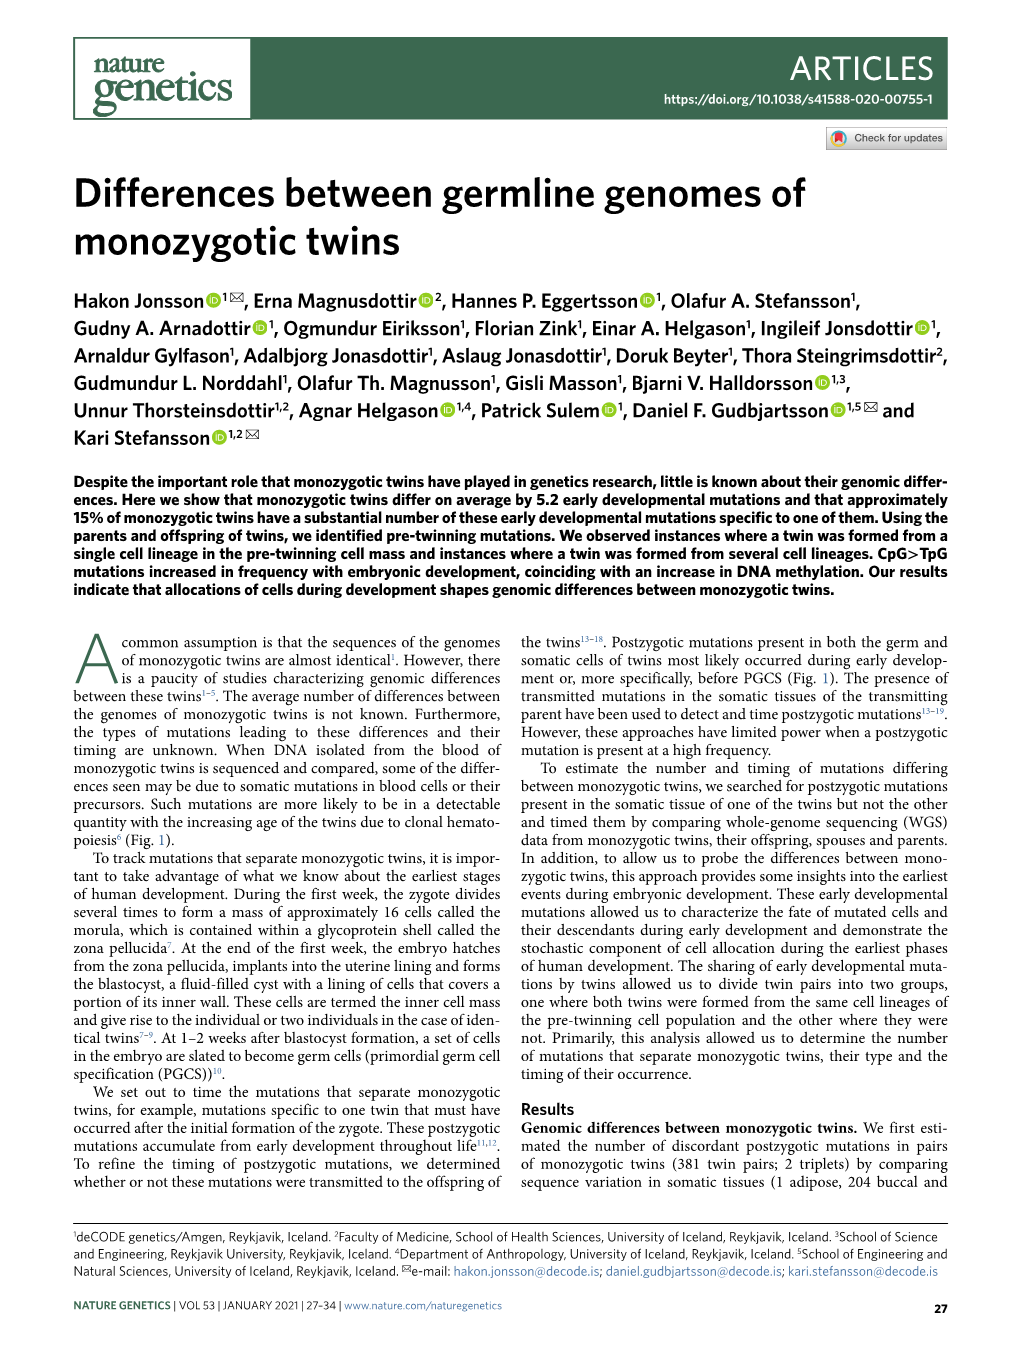 Differences Between Germline Genomes of Monozygotic Twins